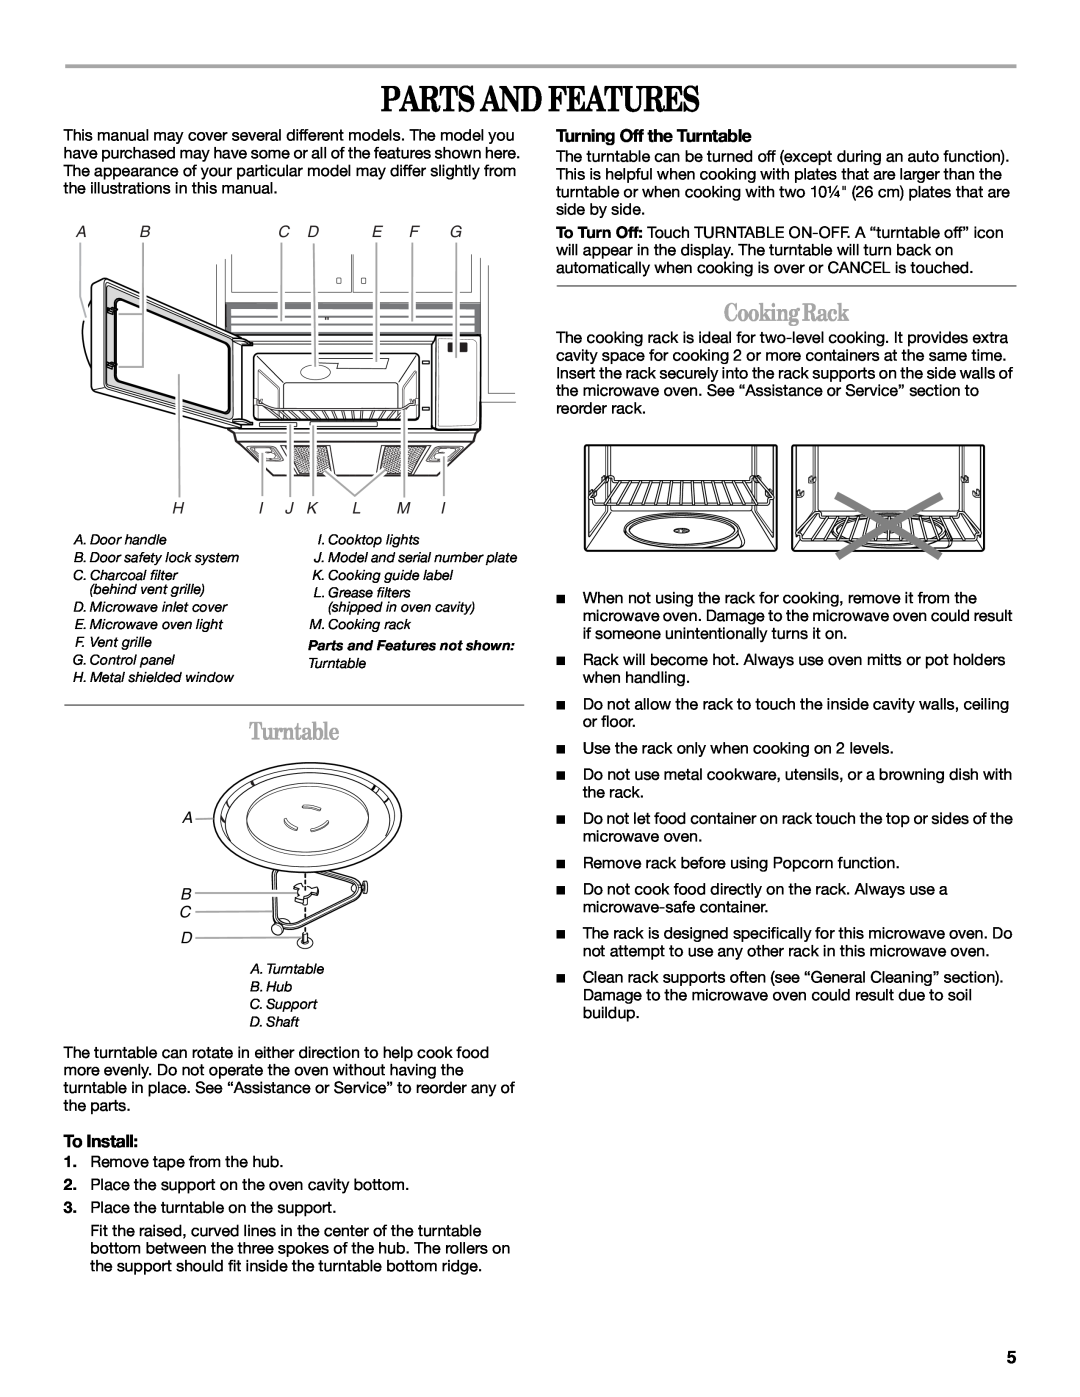 Whirlpool GH4184XS manual Parts And Features, Cooking Rack, Turntable, A Bc D E F G, A B C D 